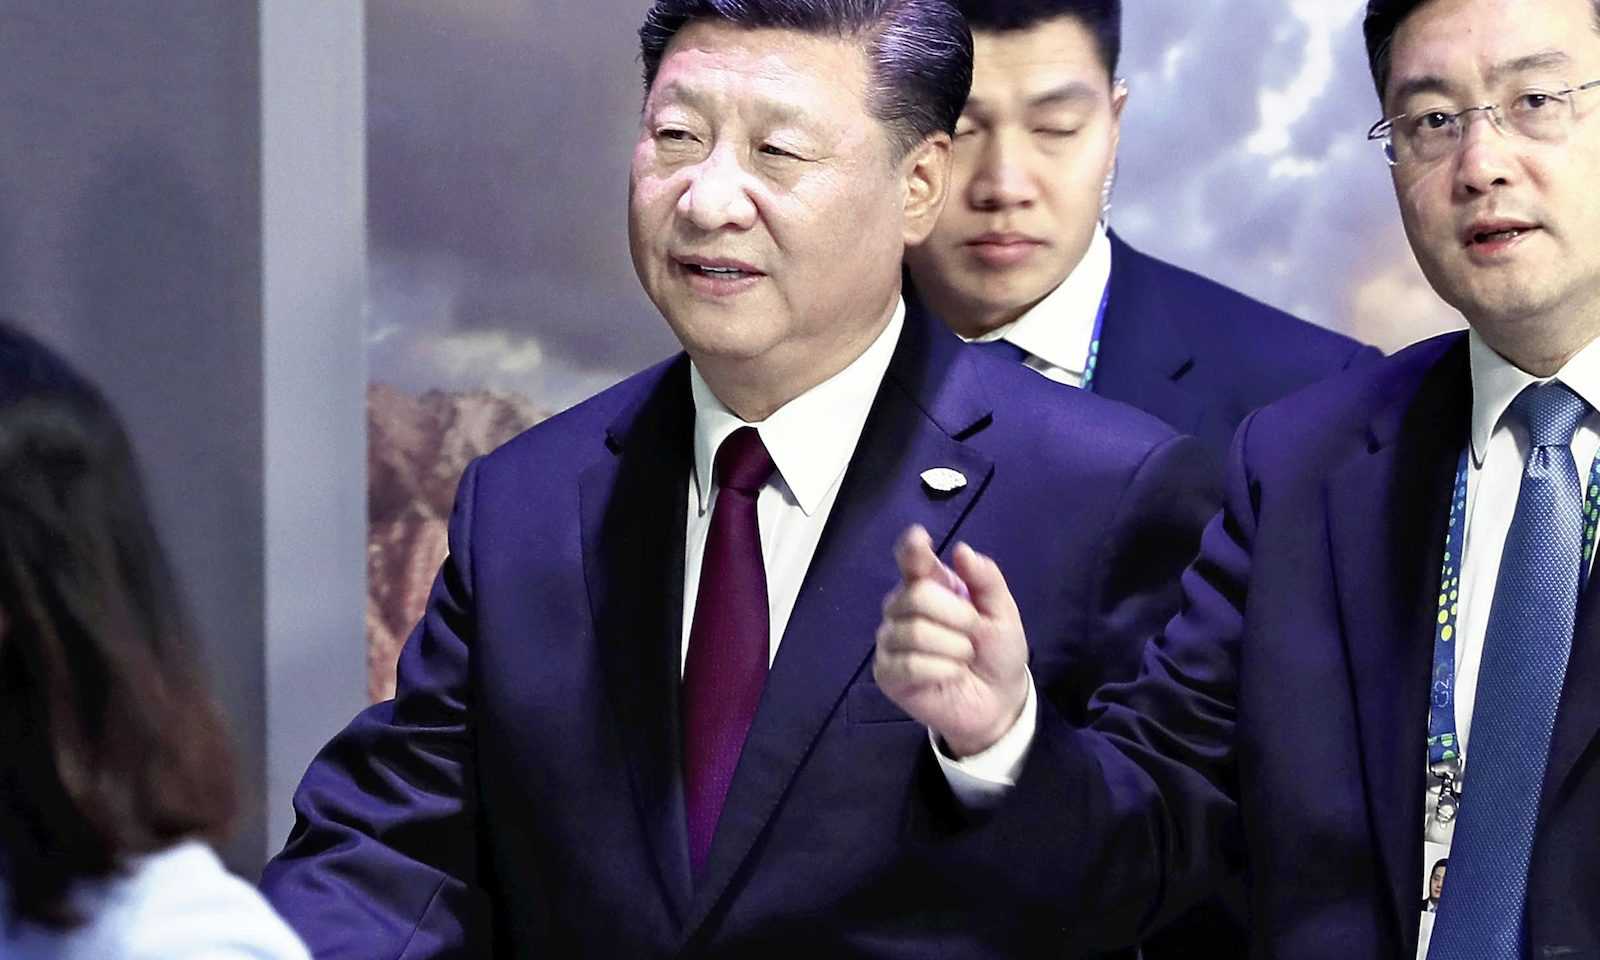 Xi unusually omitted China’s BRI from his G20 remarks